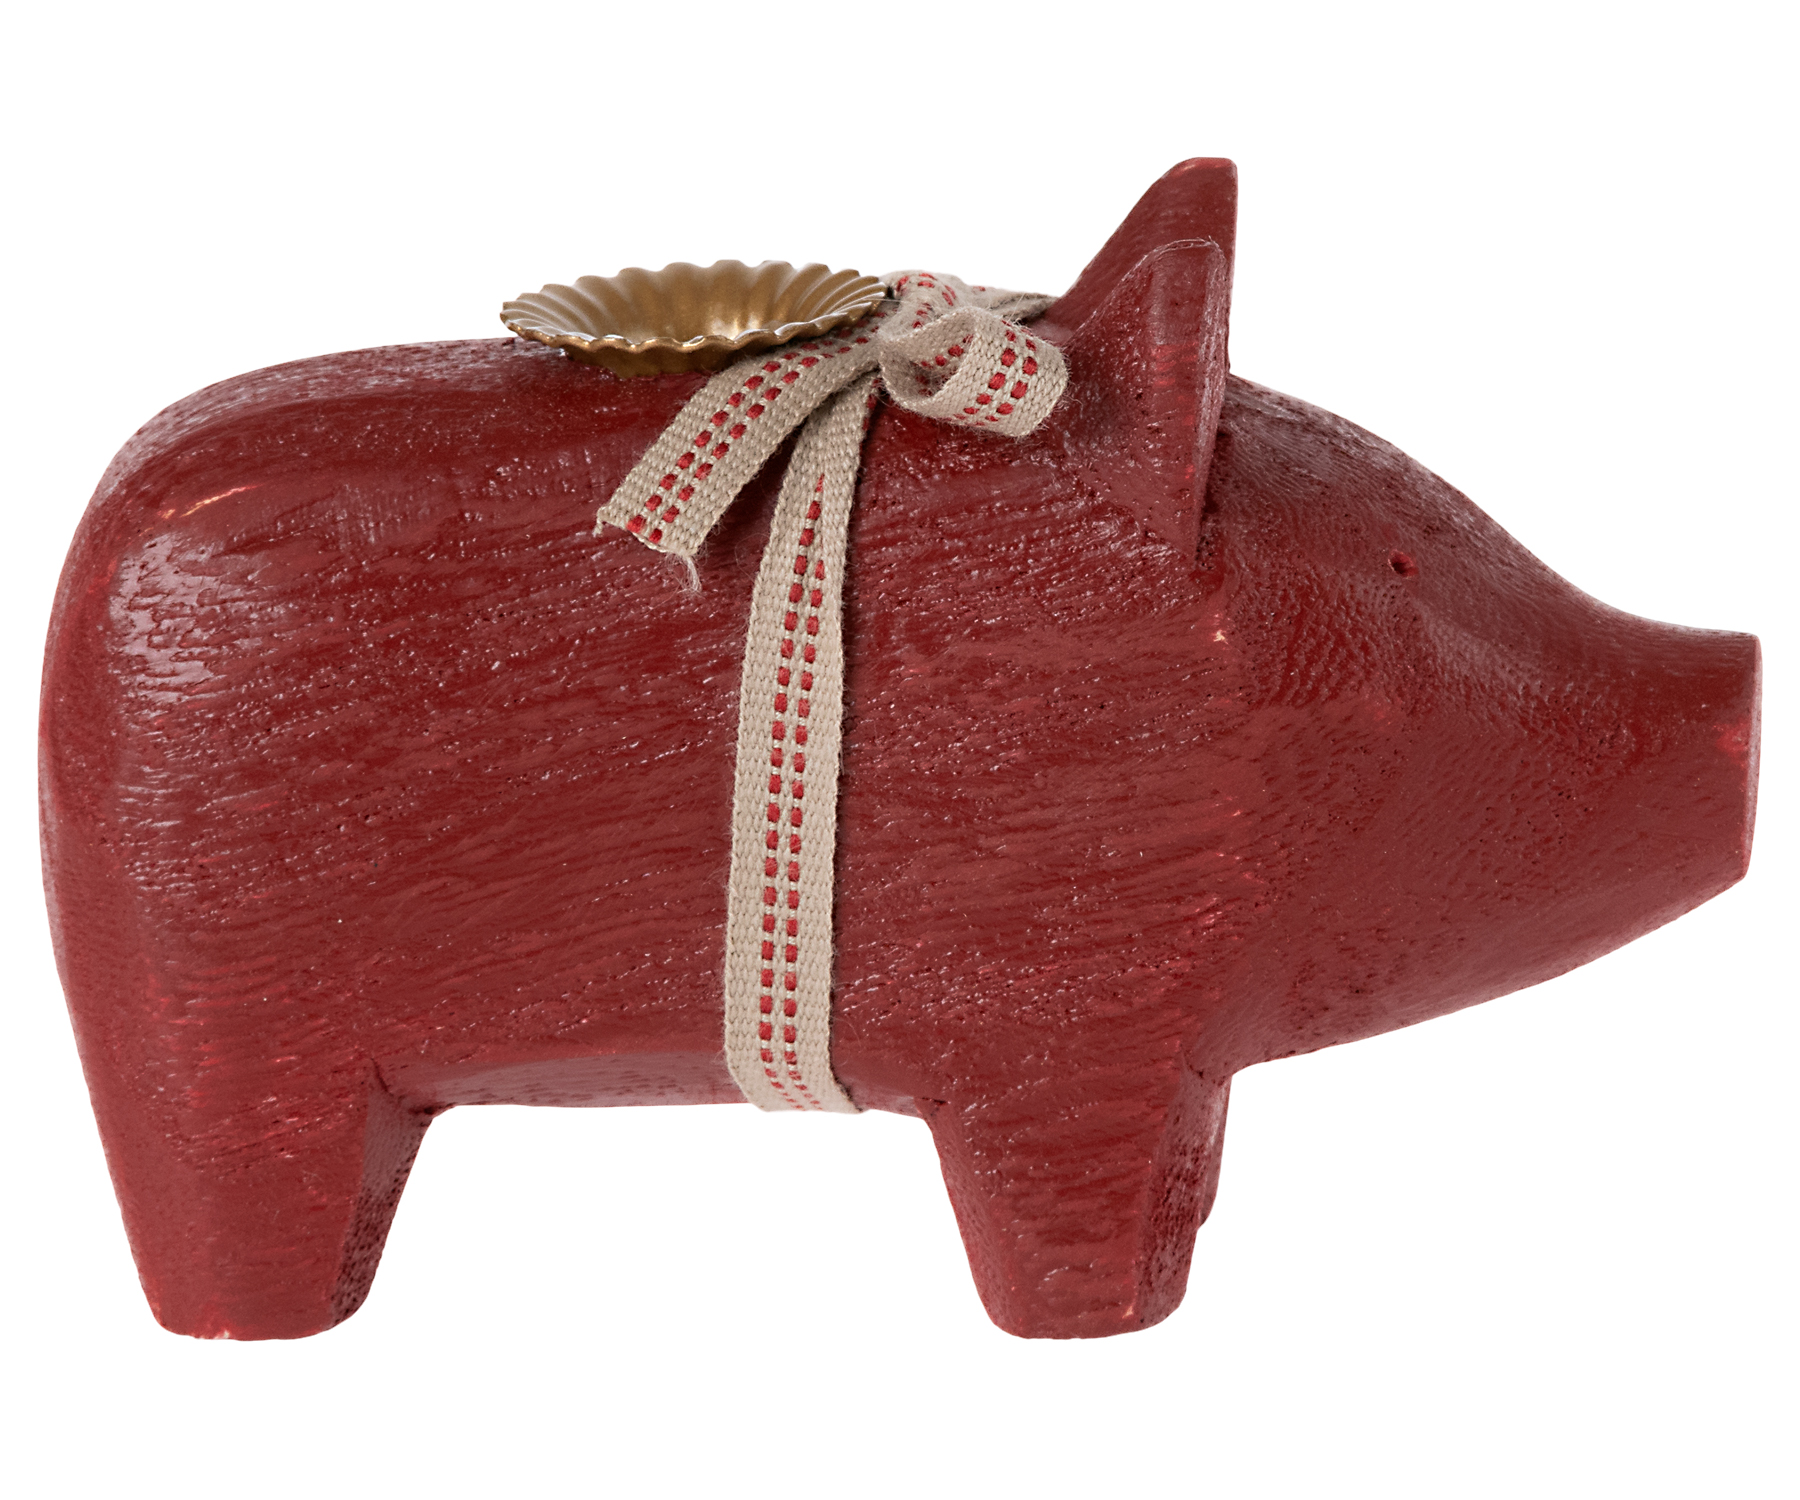 Wooden pig, Small – Red